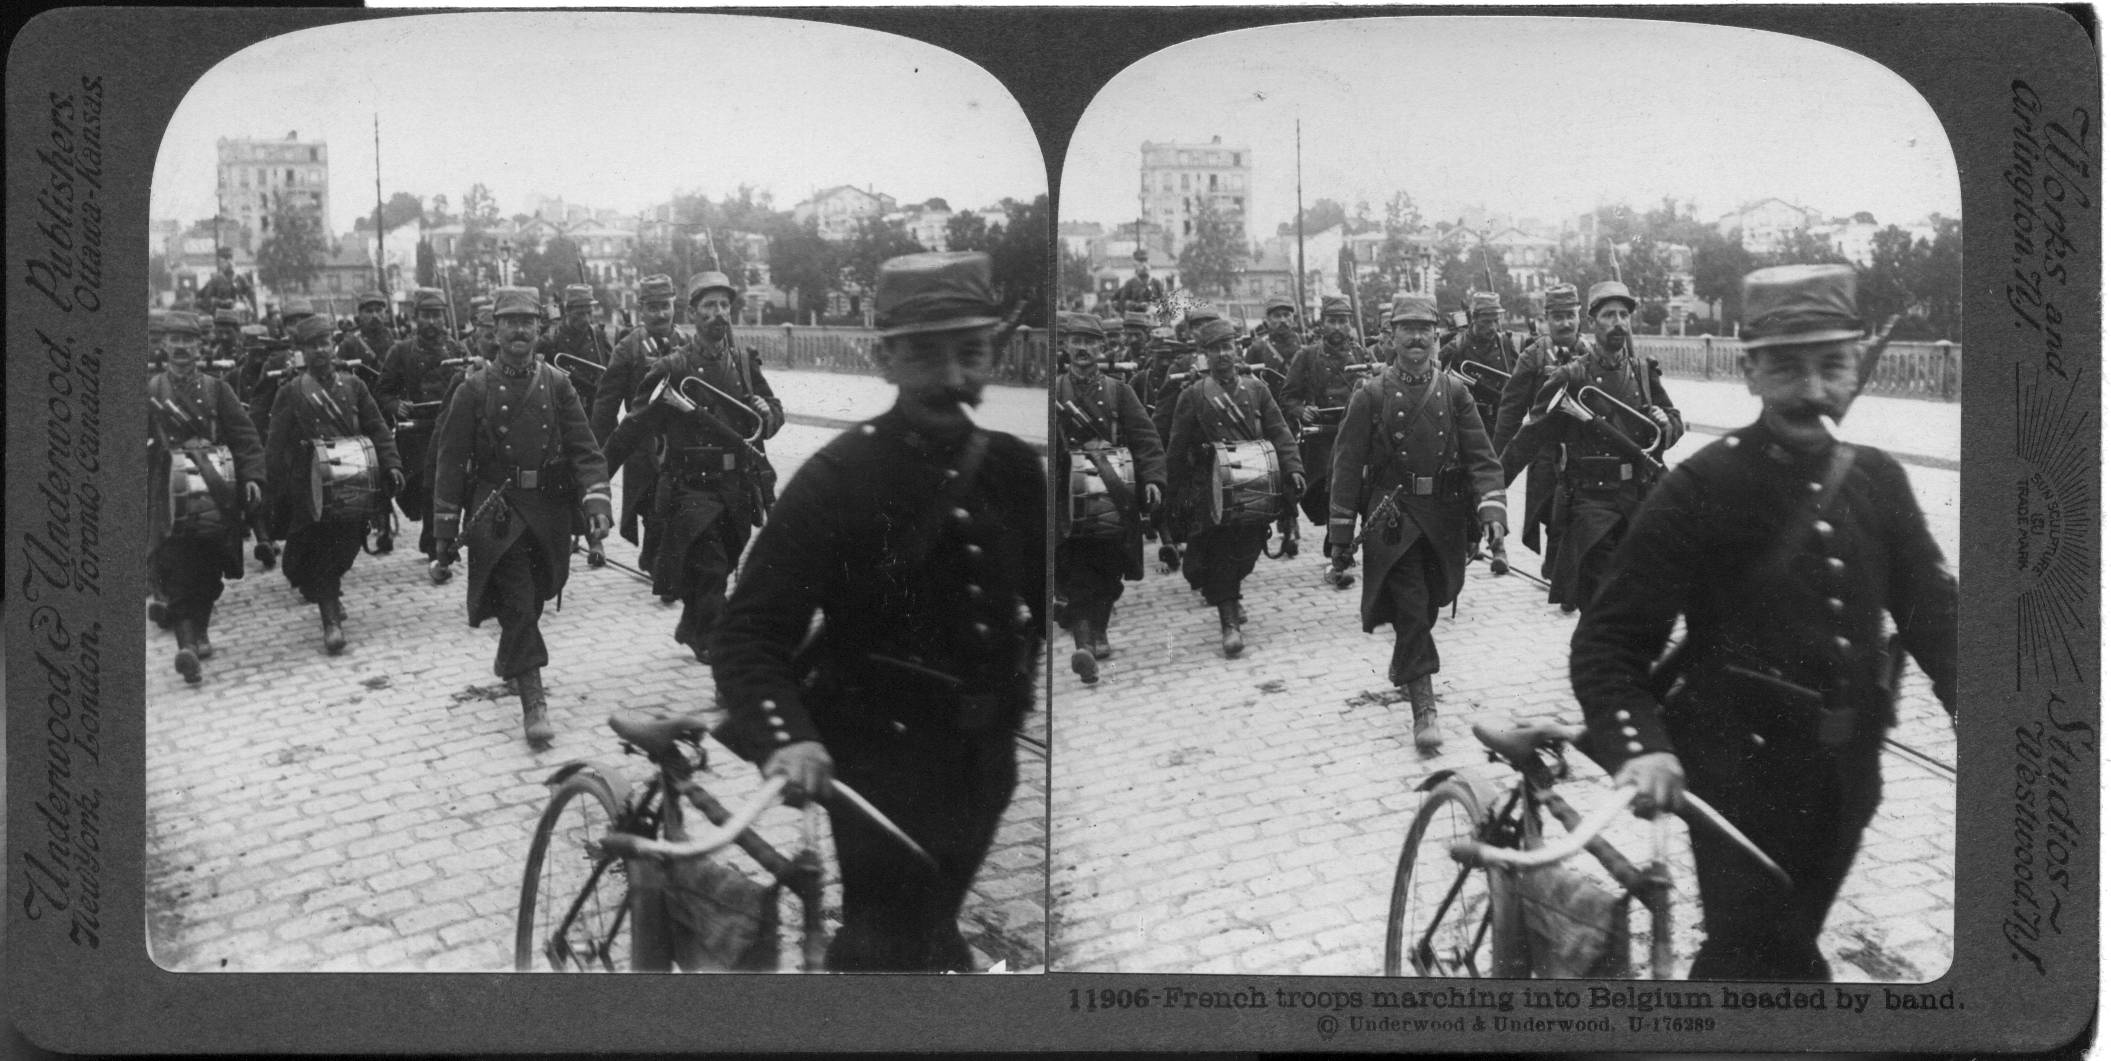 French troops marching into Belgium headed by band